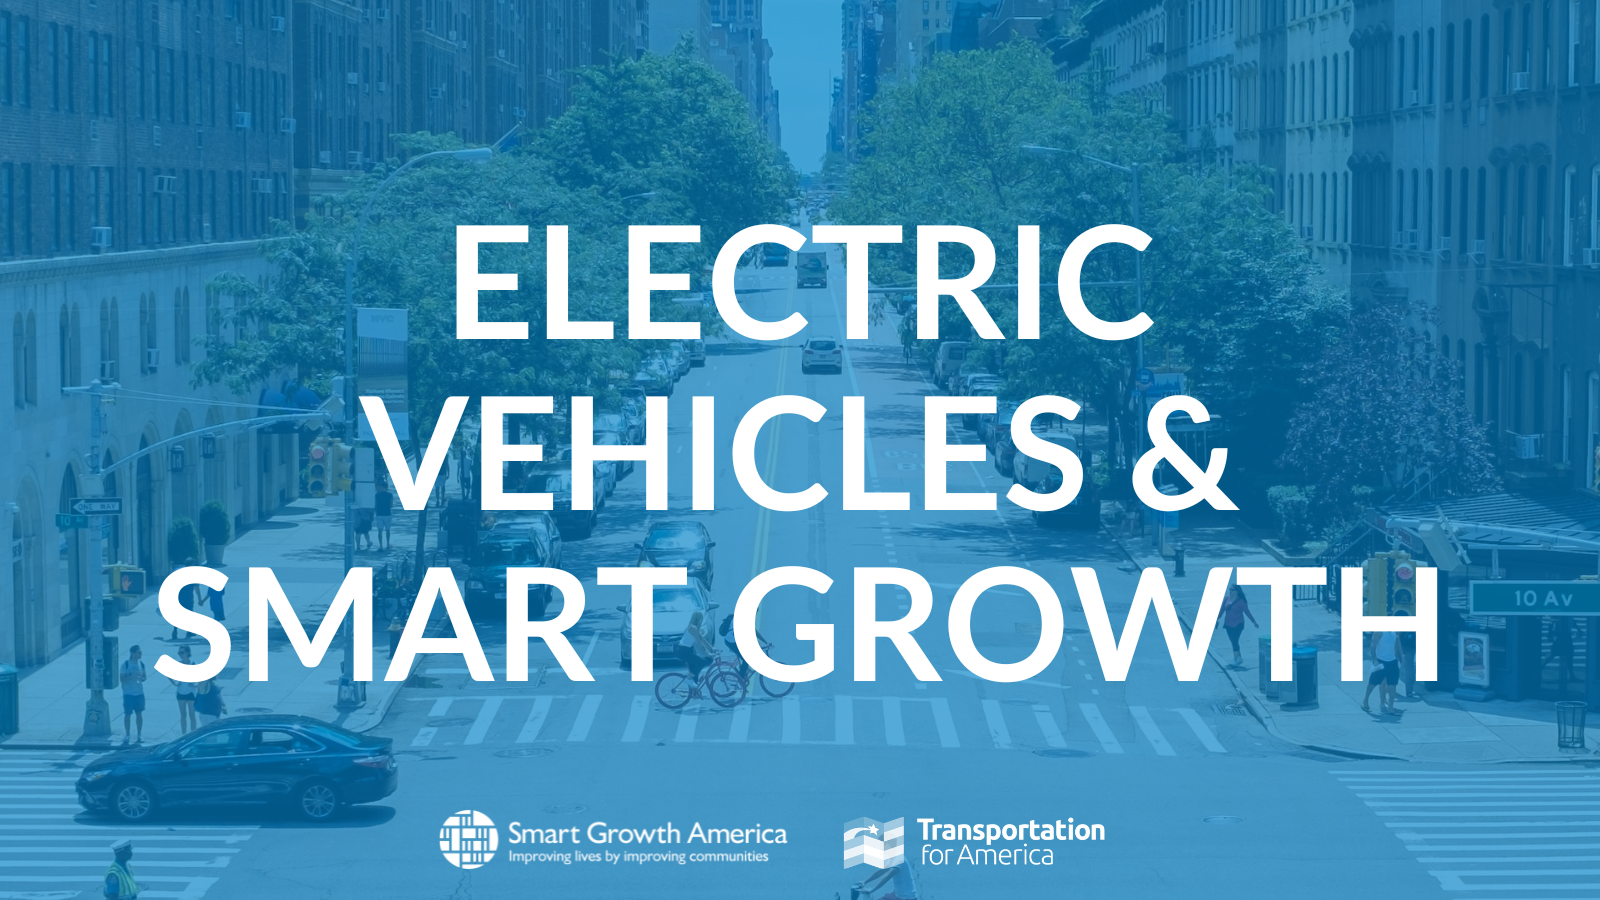 Electric vehicles & smart growth